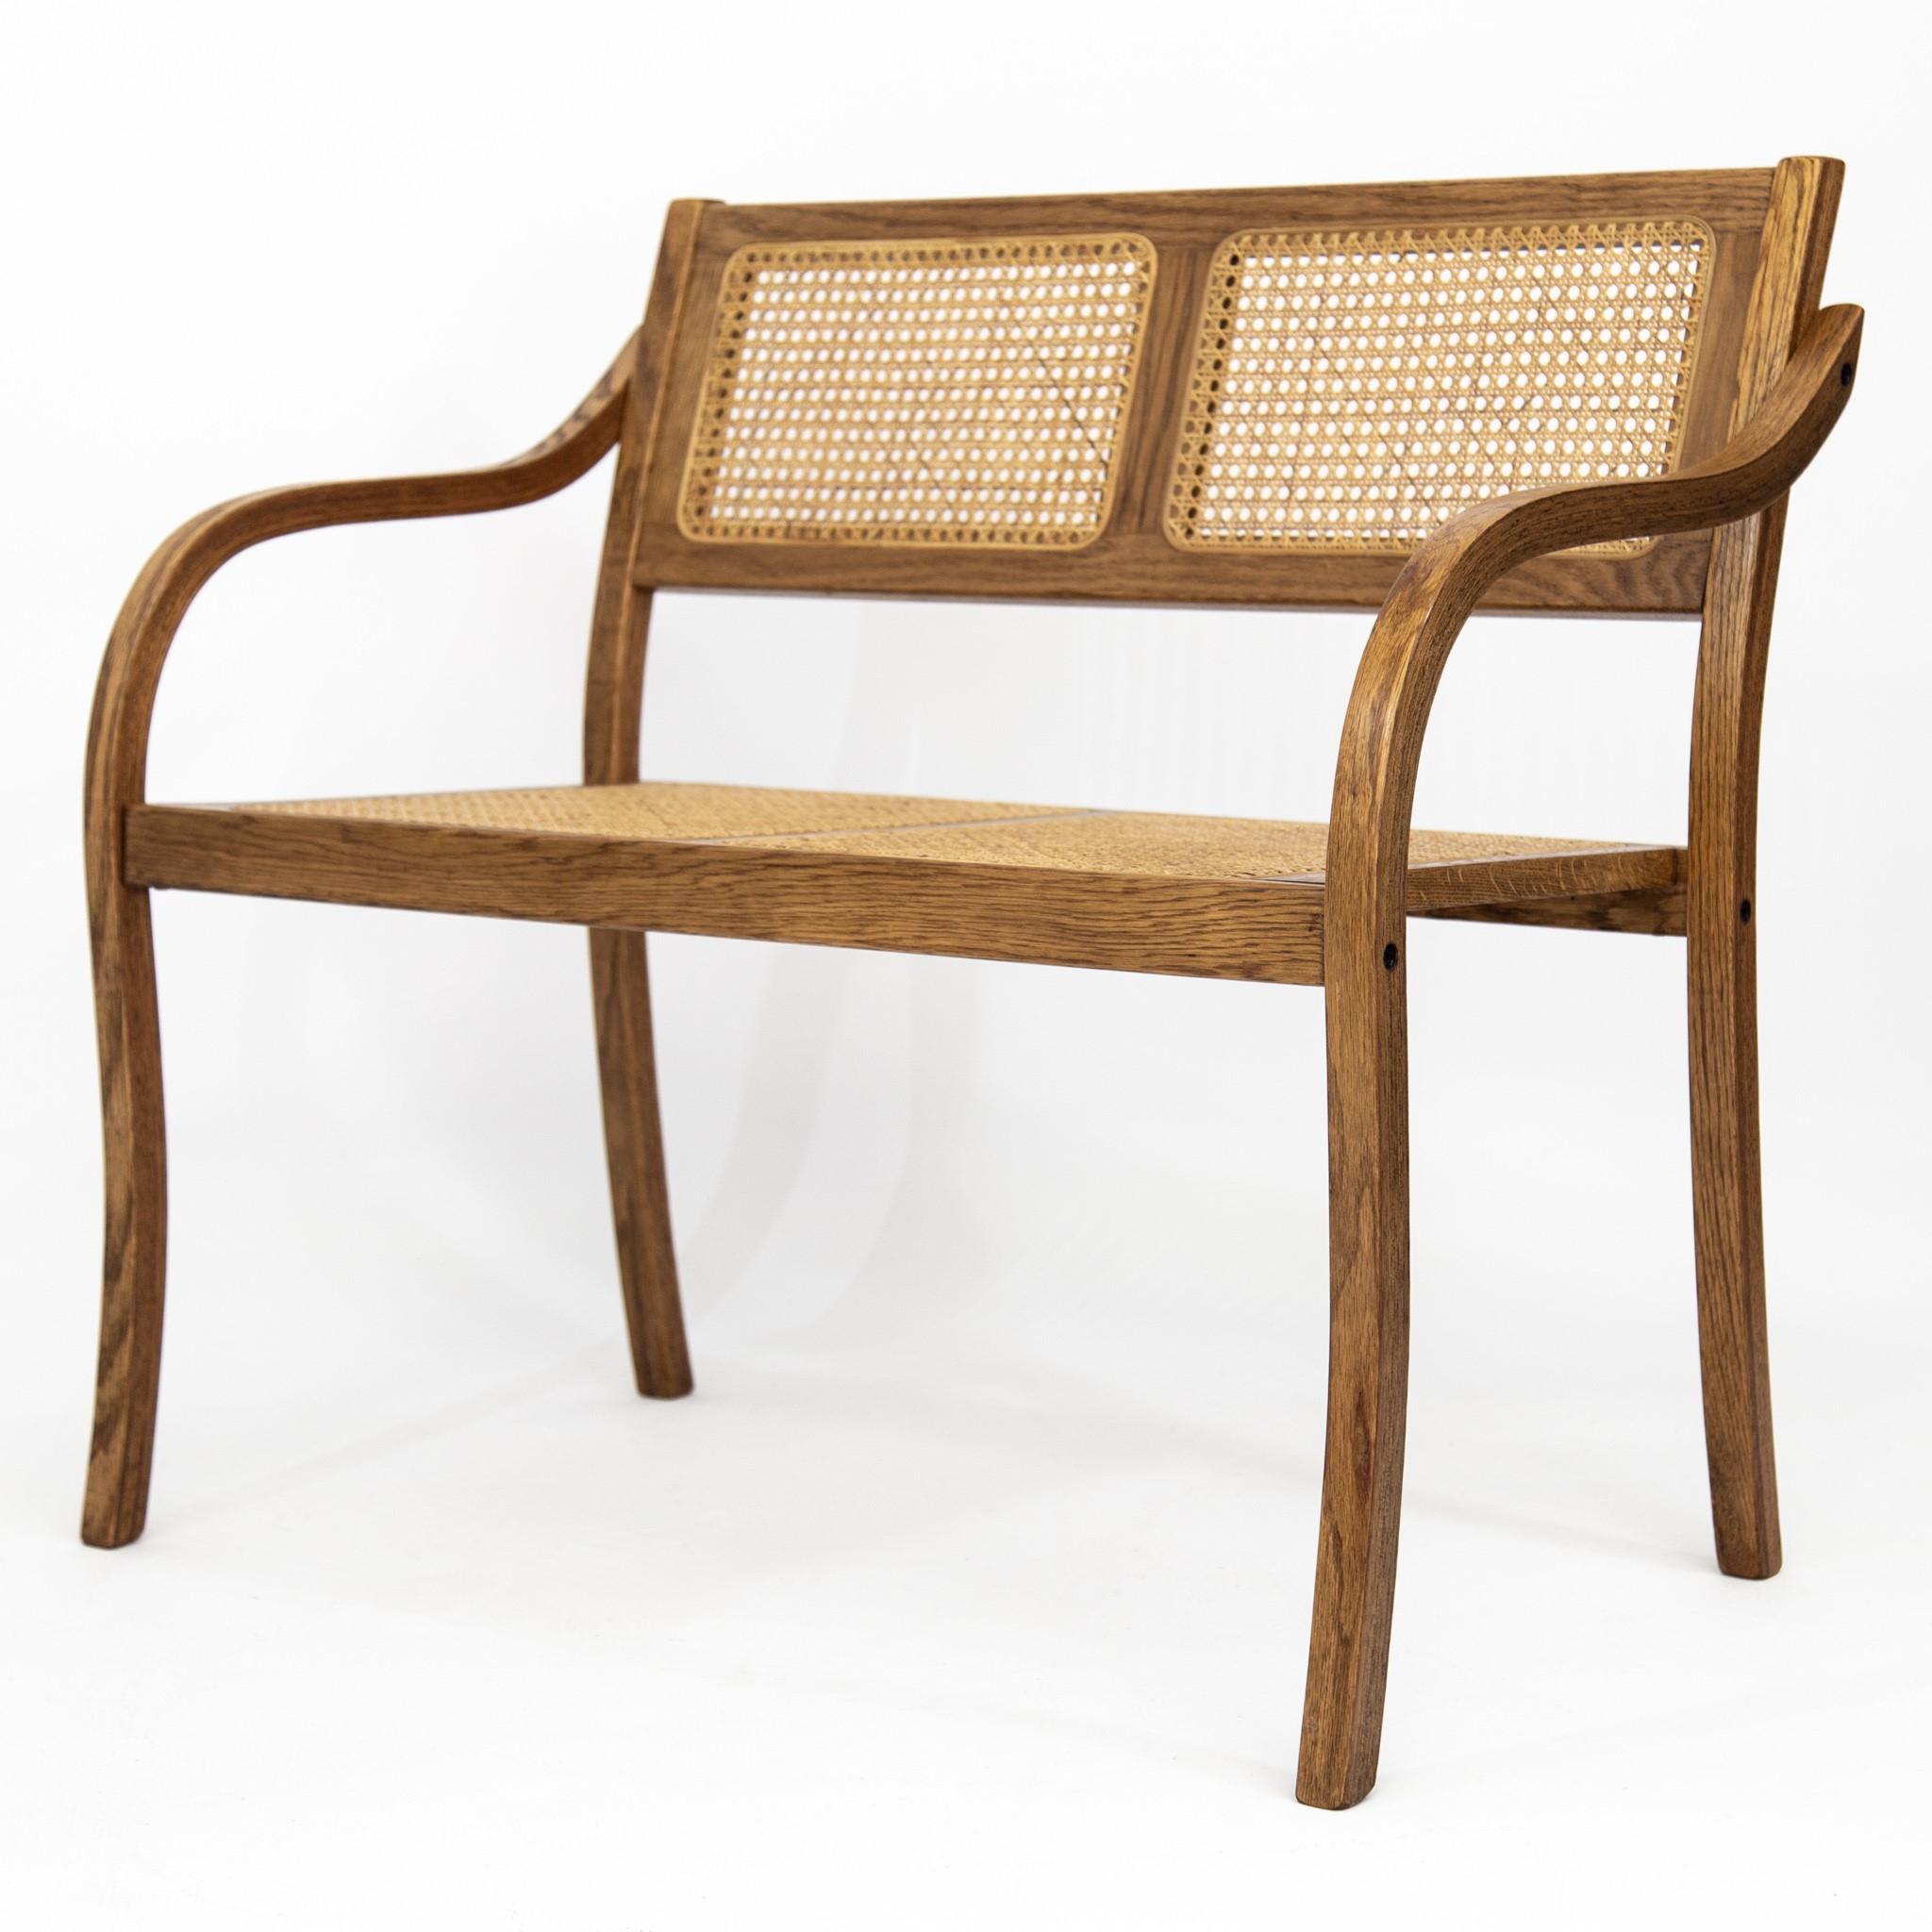 Minimalist Caned Oak Settee Bench with Bentwood Arms